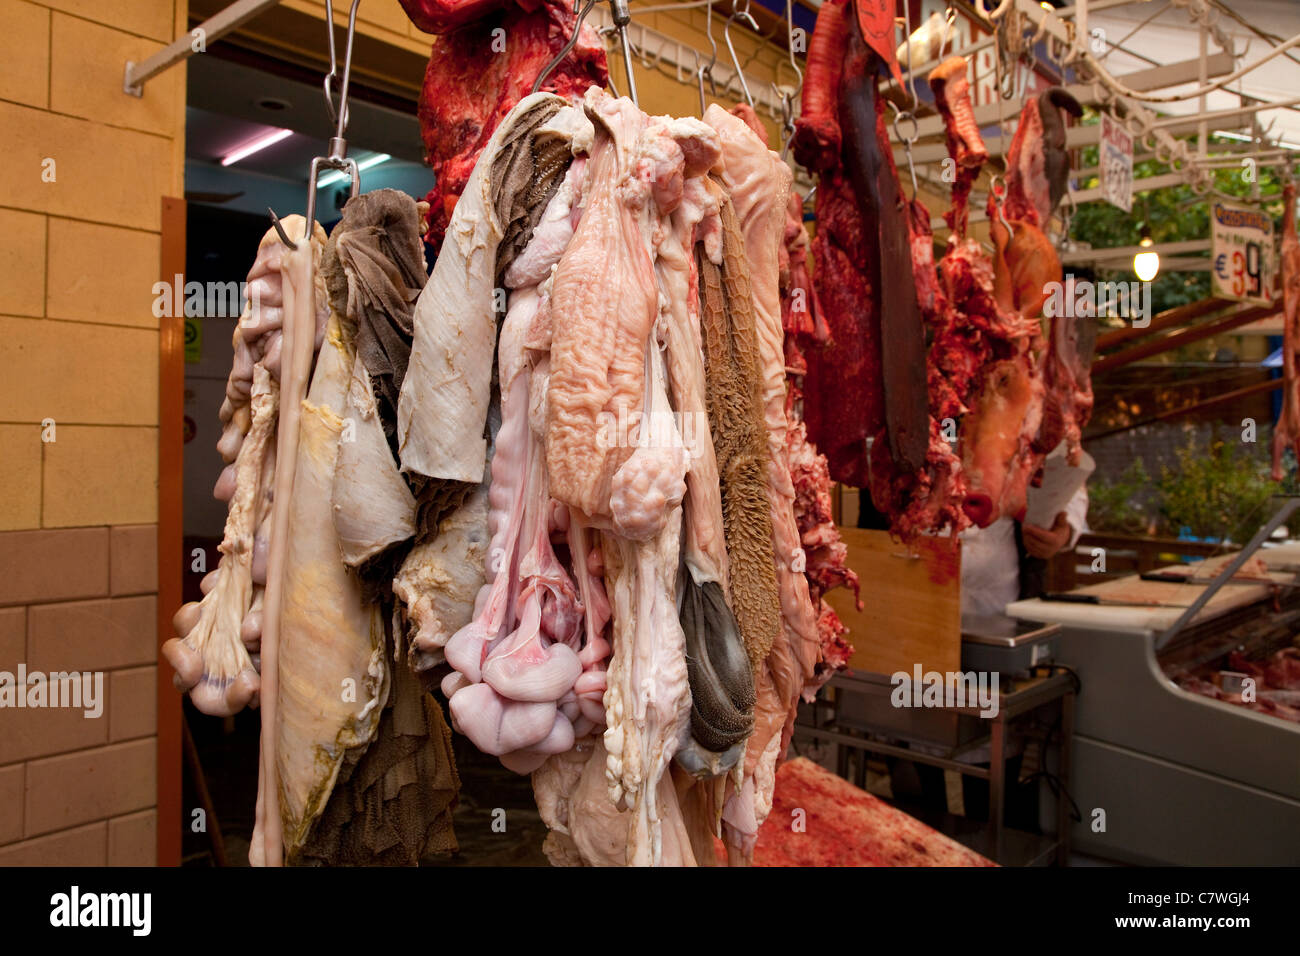 Butcher's shop selling raw meat and guts at Ballarò, traditional old market in Palermo, Sicily, Sicilia, Italy Stock Photo